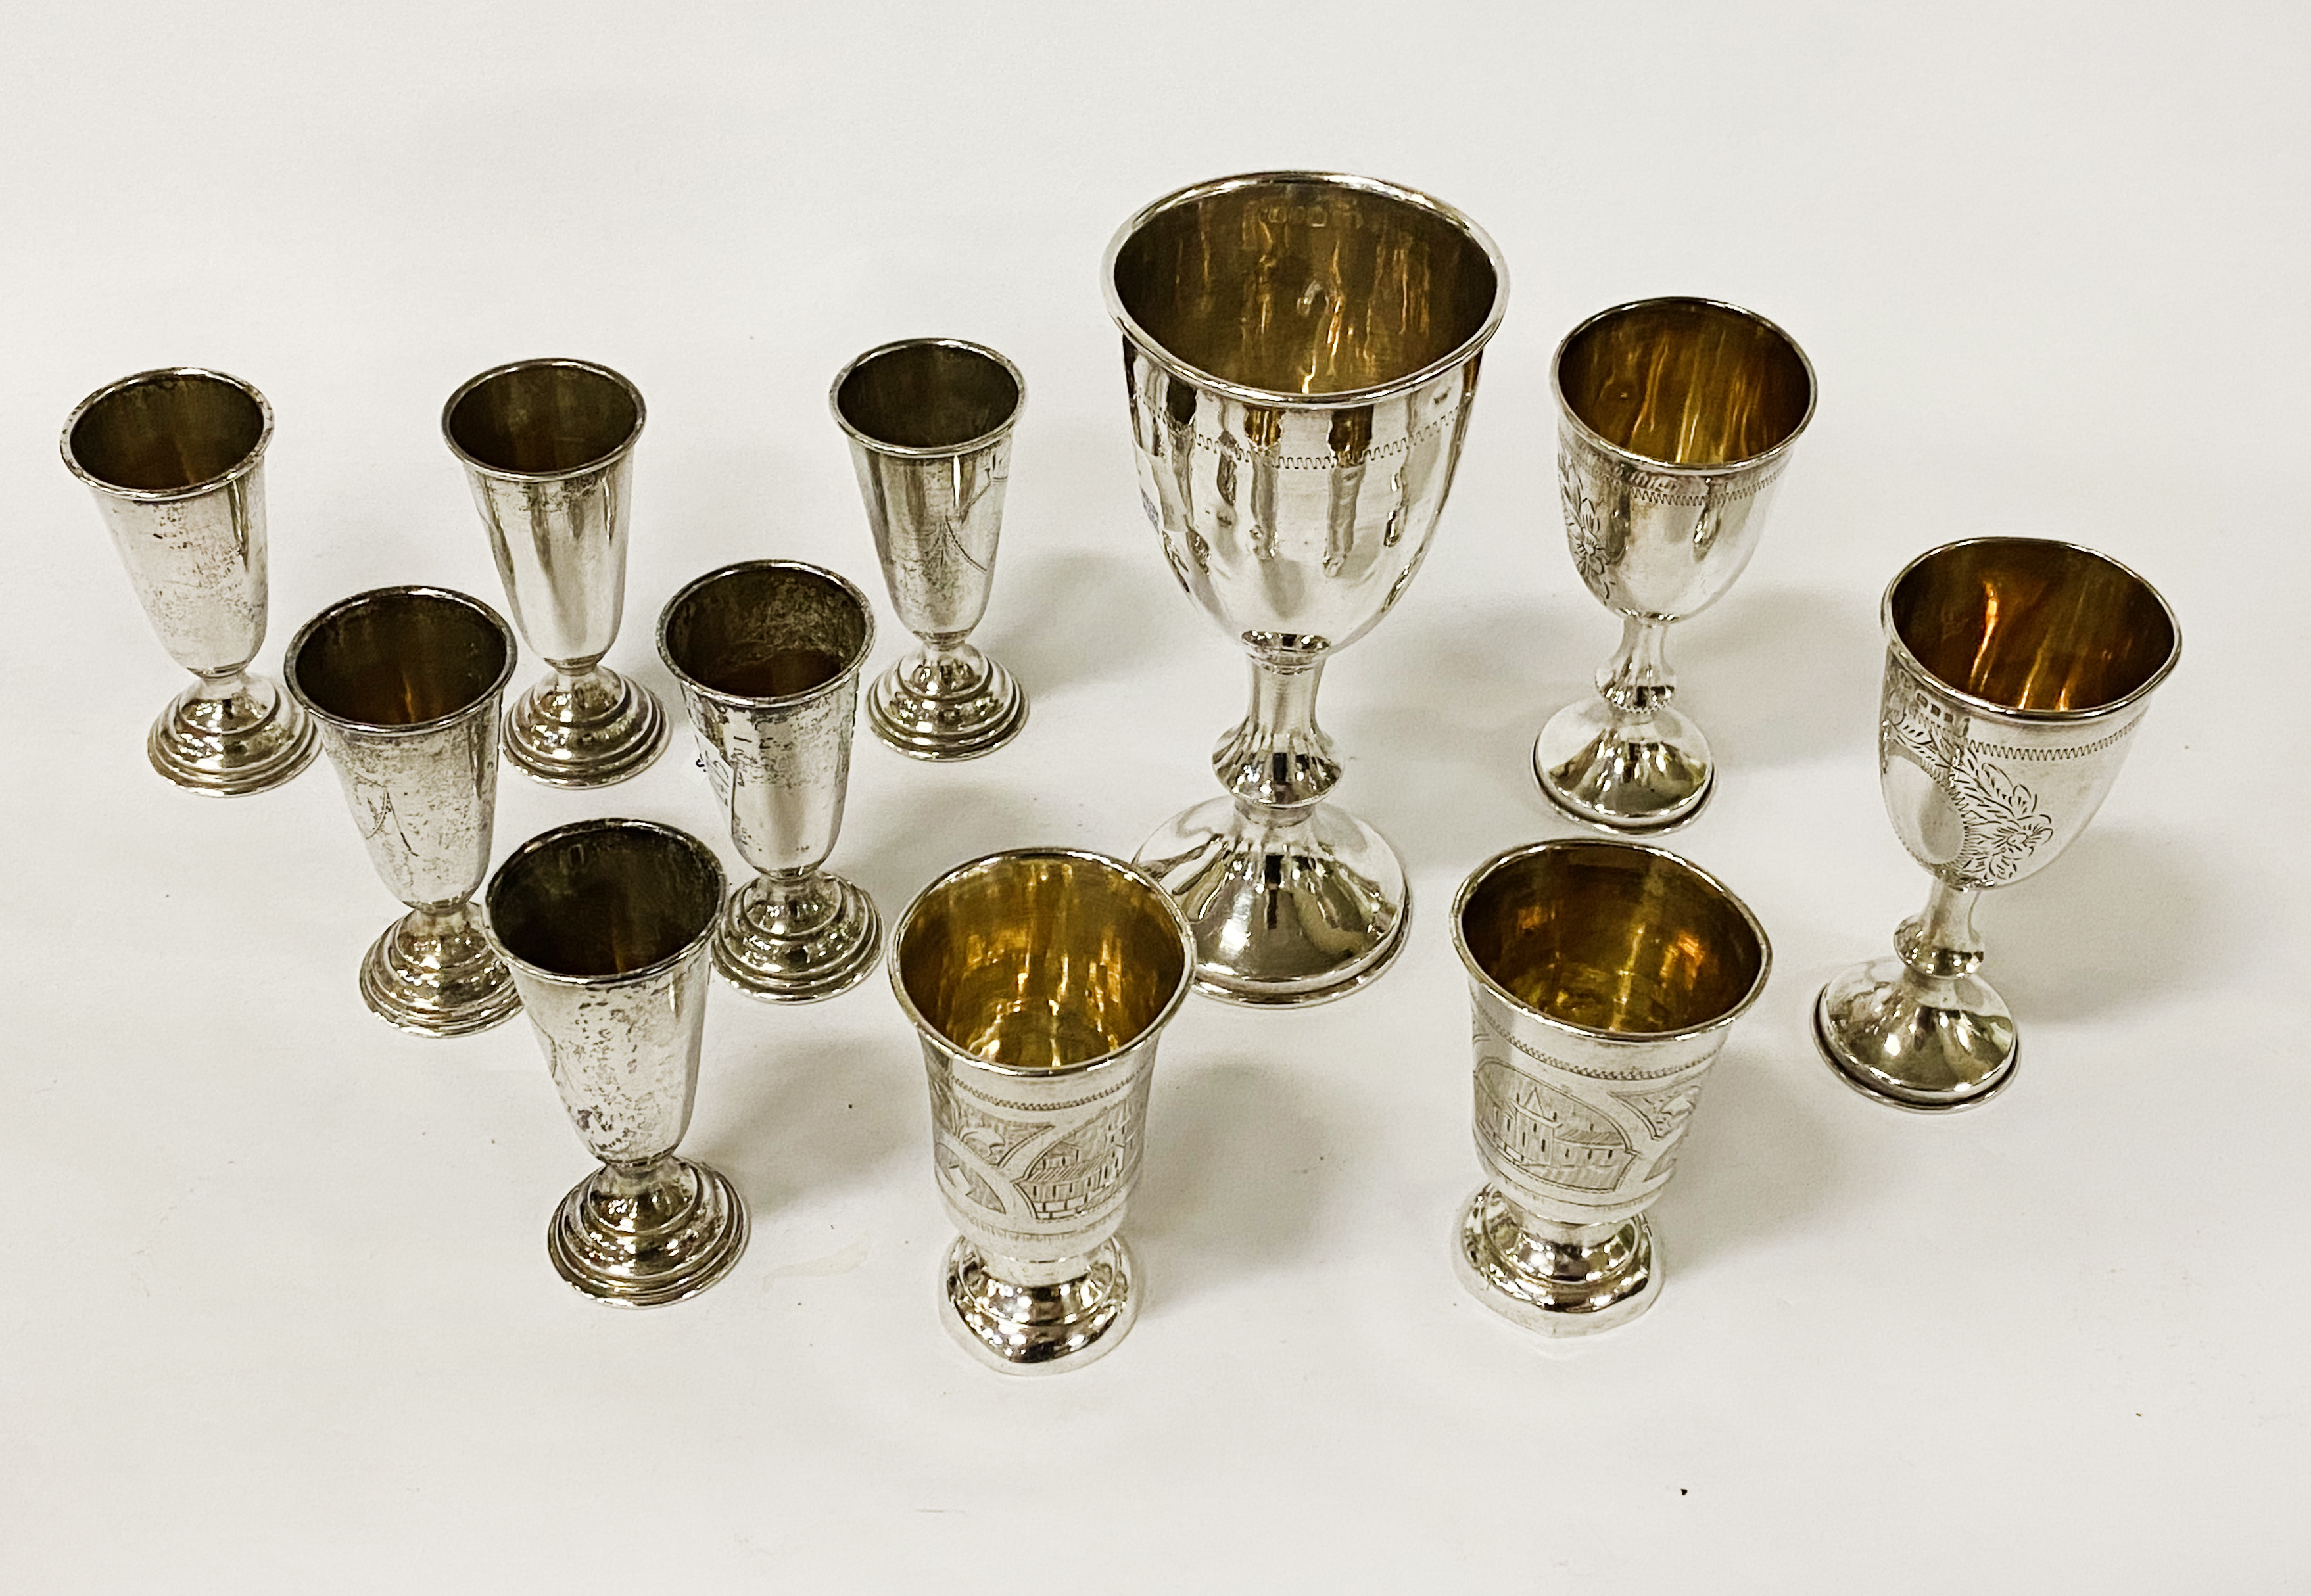 H/M SILVER COLLECTION OF KIDDISH CUPS - 10 OZS APPROX